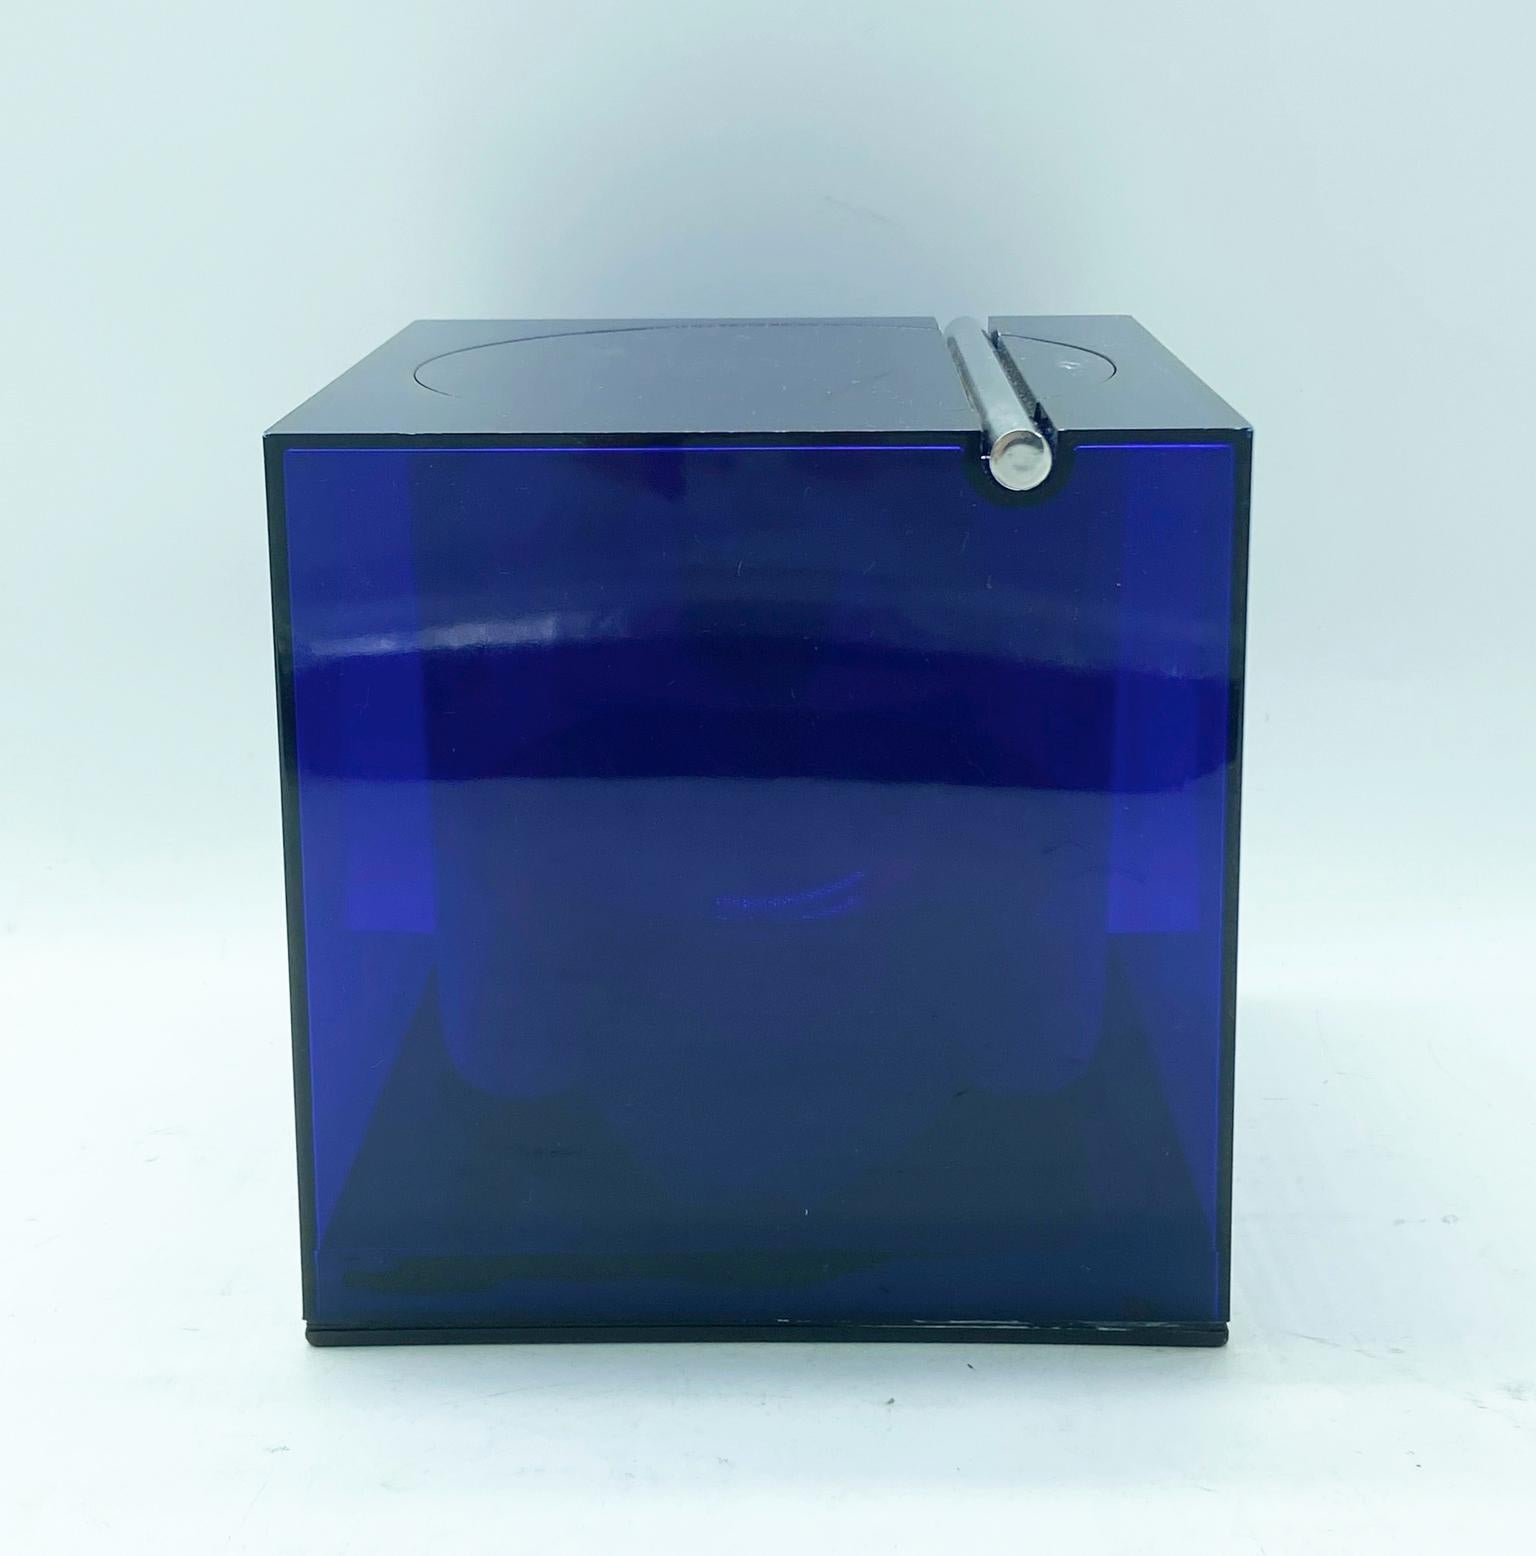 Ice cube made of electric blue plexiglas, extremely original in a Minimalist style, very popular in the 1970s.